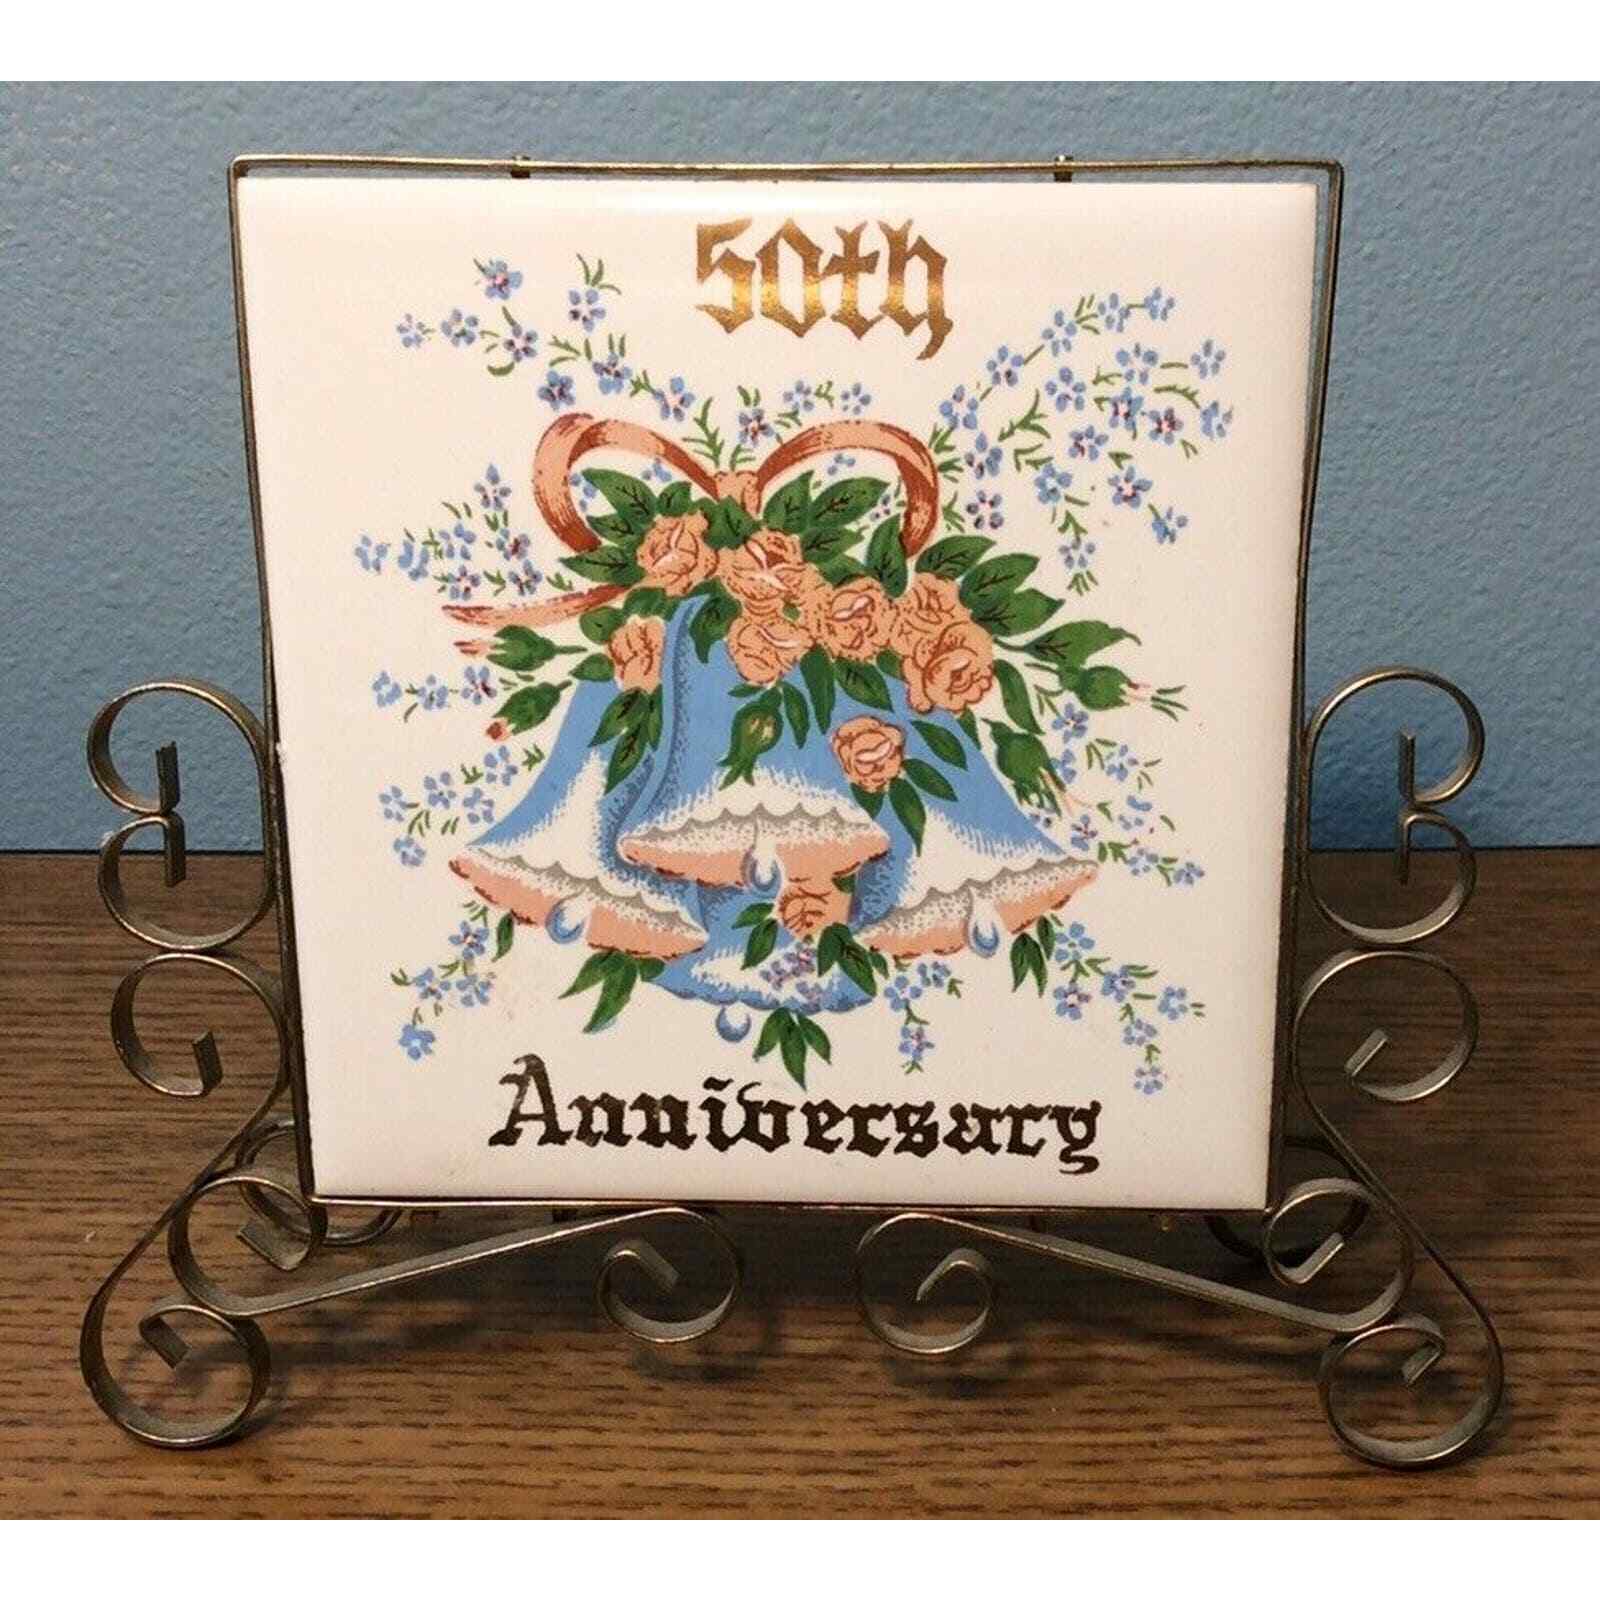 Vintage 50th Anniversary 4x4 Tile In Metal Napkin Holder- Tile Is Removable EUC